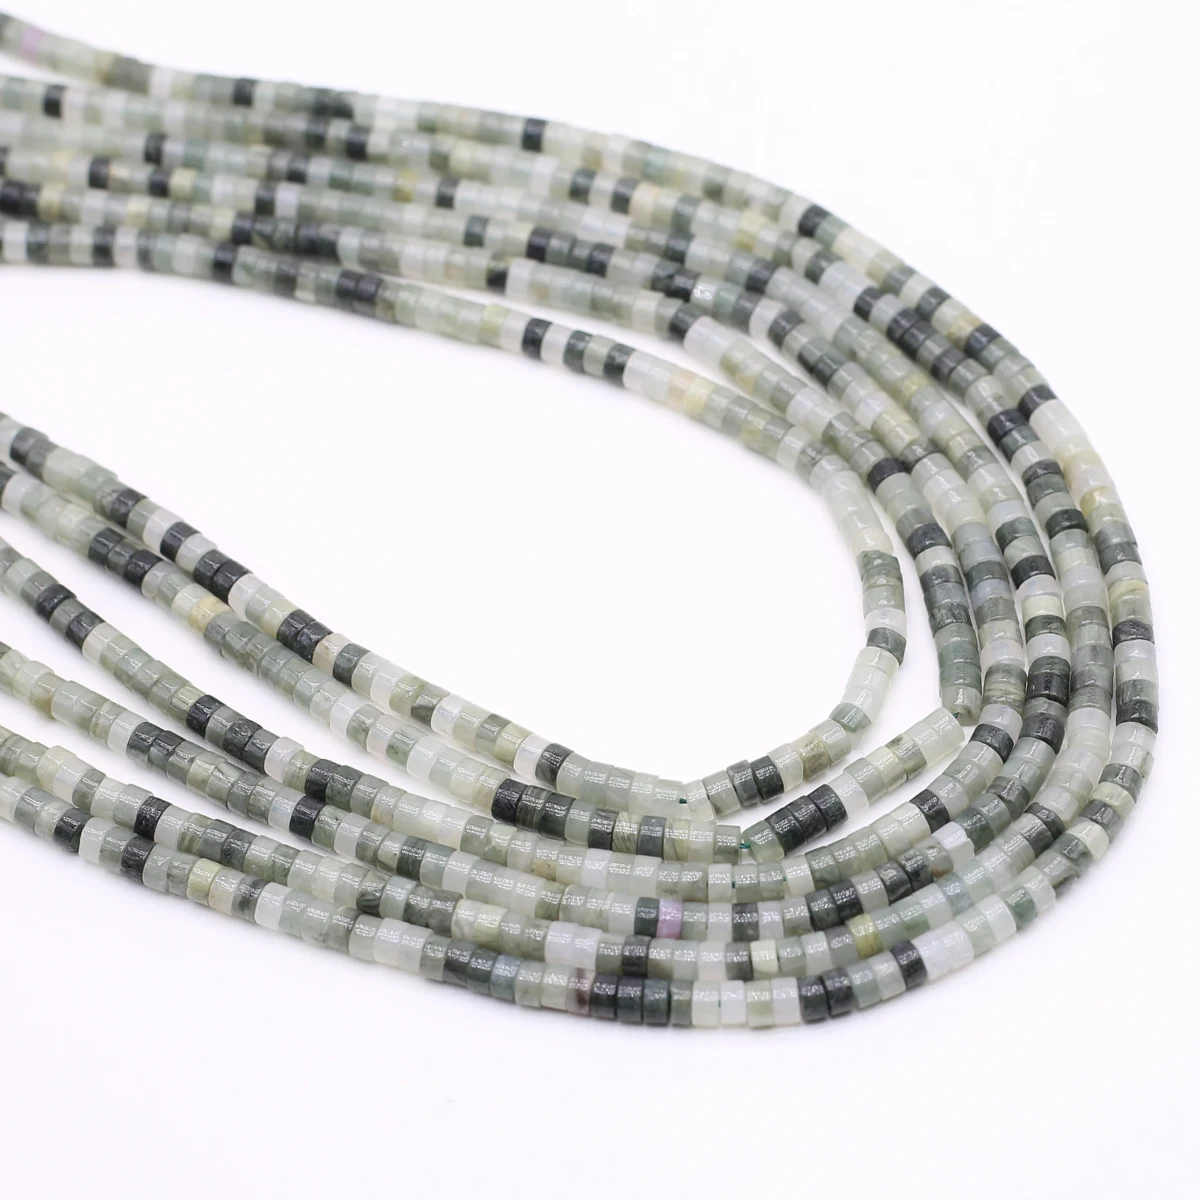 

2x4mm Natural Glauconites Bead Column Tube Stone Loose Spacer Beaded for Making DIY Jewelry Making Necklace Bracelet Length 14''